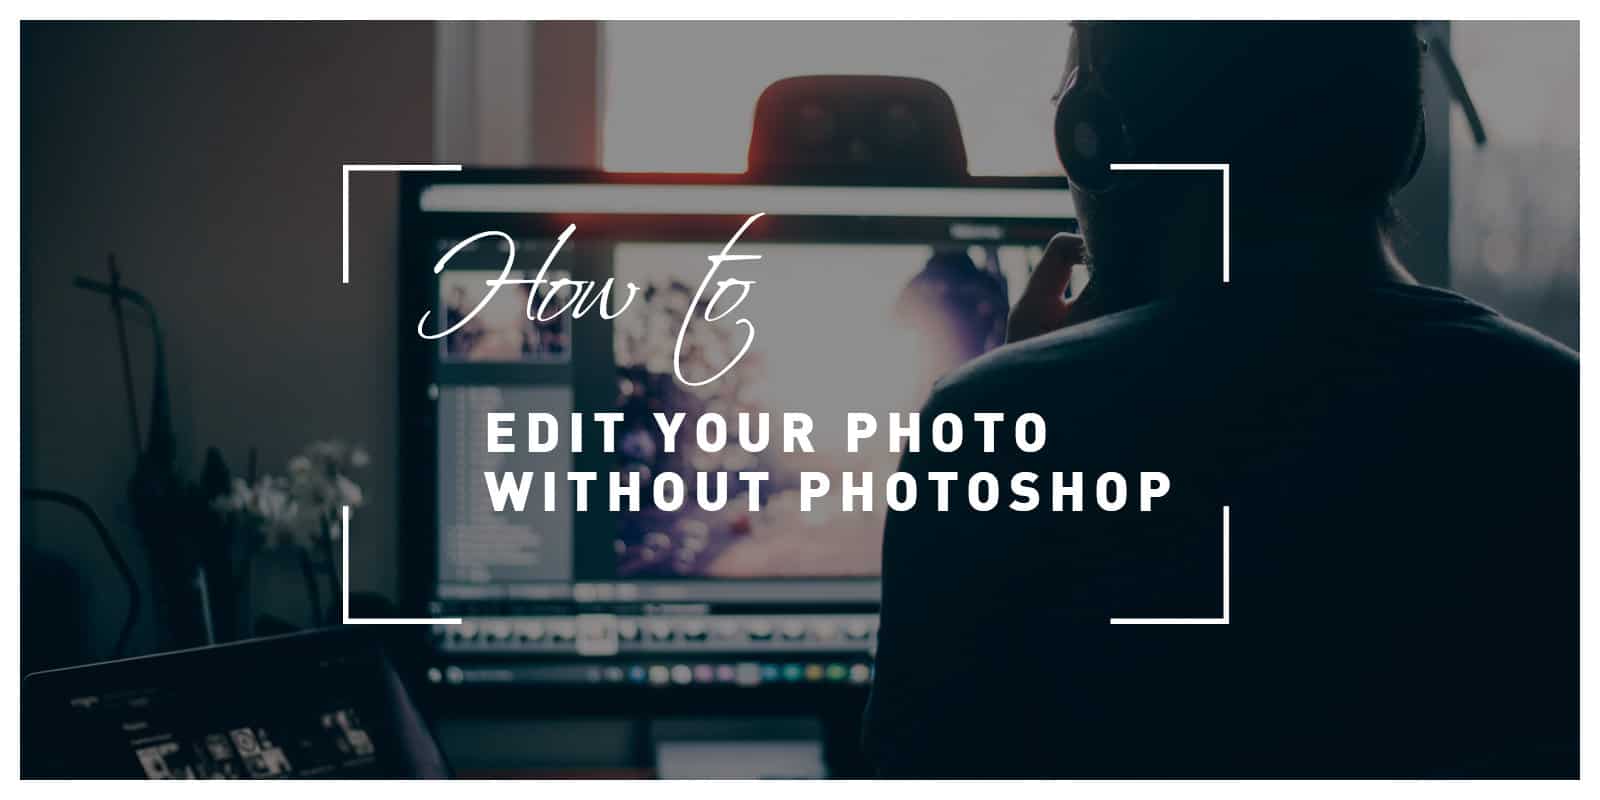 How to edit photo